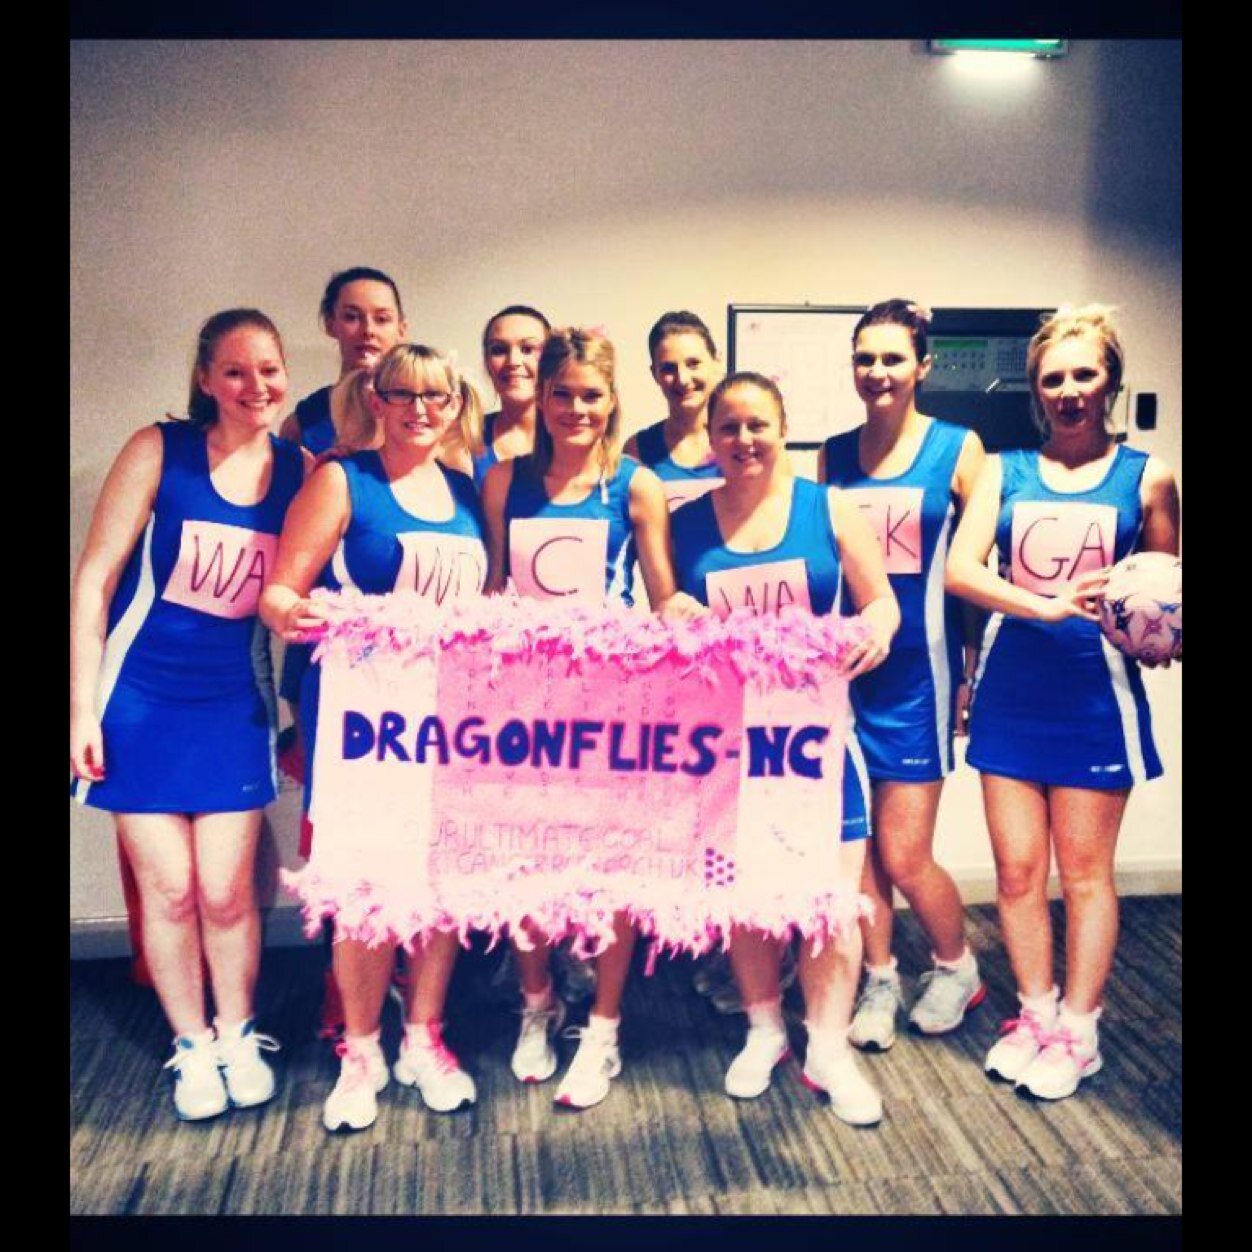 We are a friendly netball team that welcomes everyone to come and join. This twitter account will keep you updated on events, training and matches